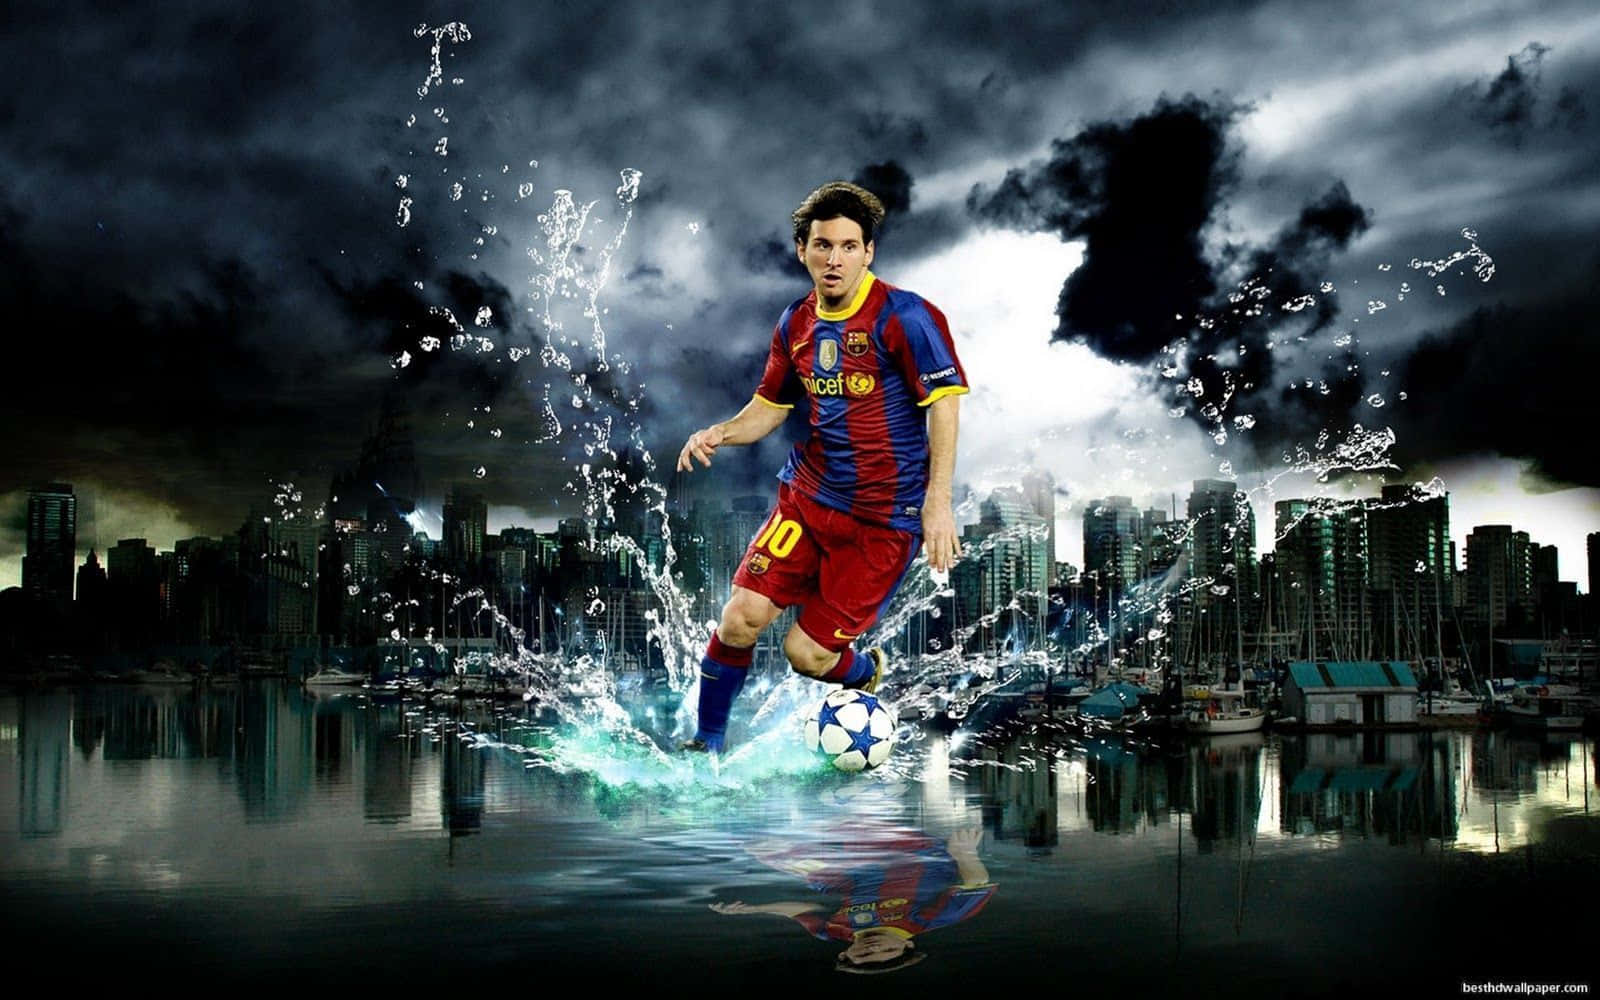 Dive deeper into the world of Lionel Messi with this cool wallpaper Wallpaper